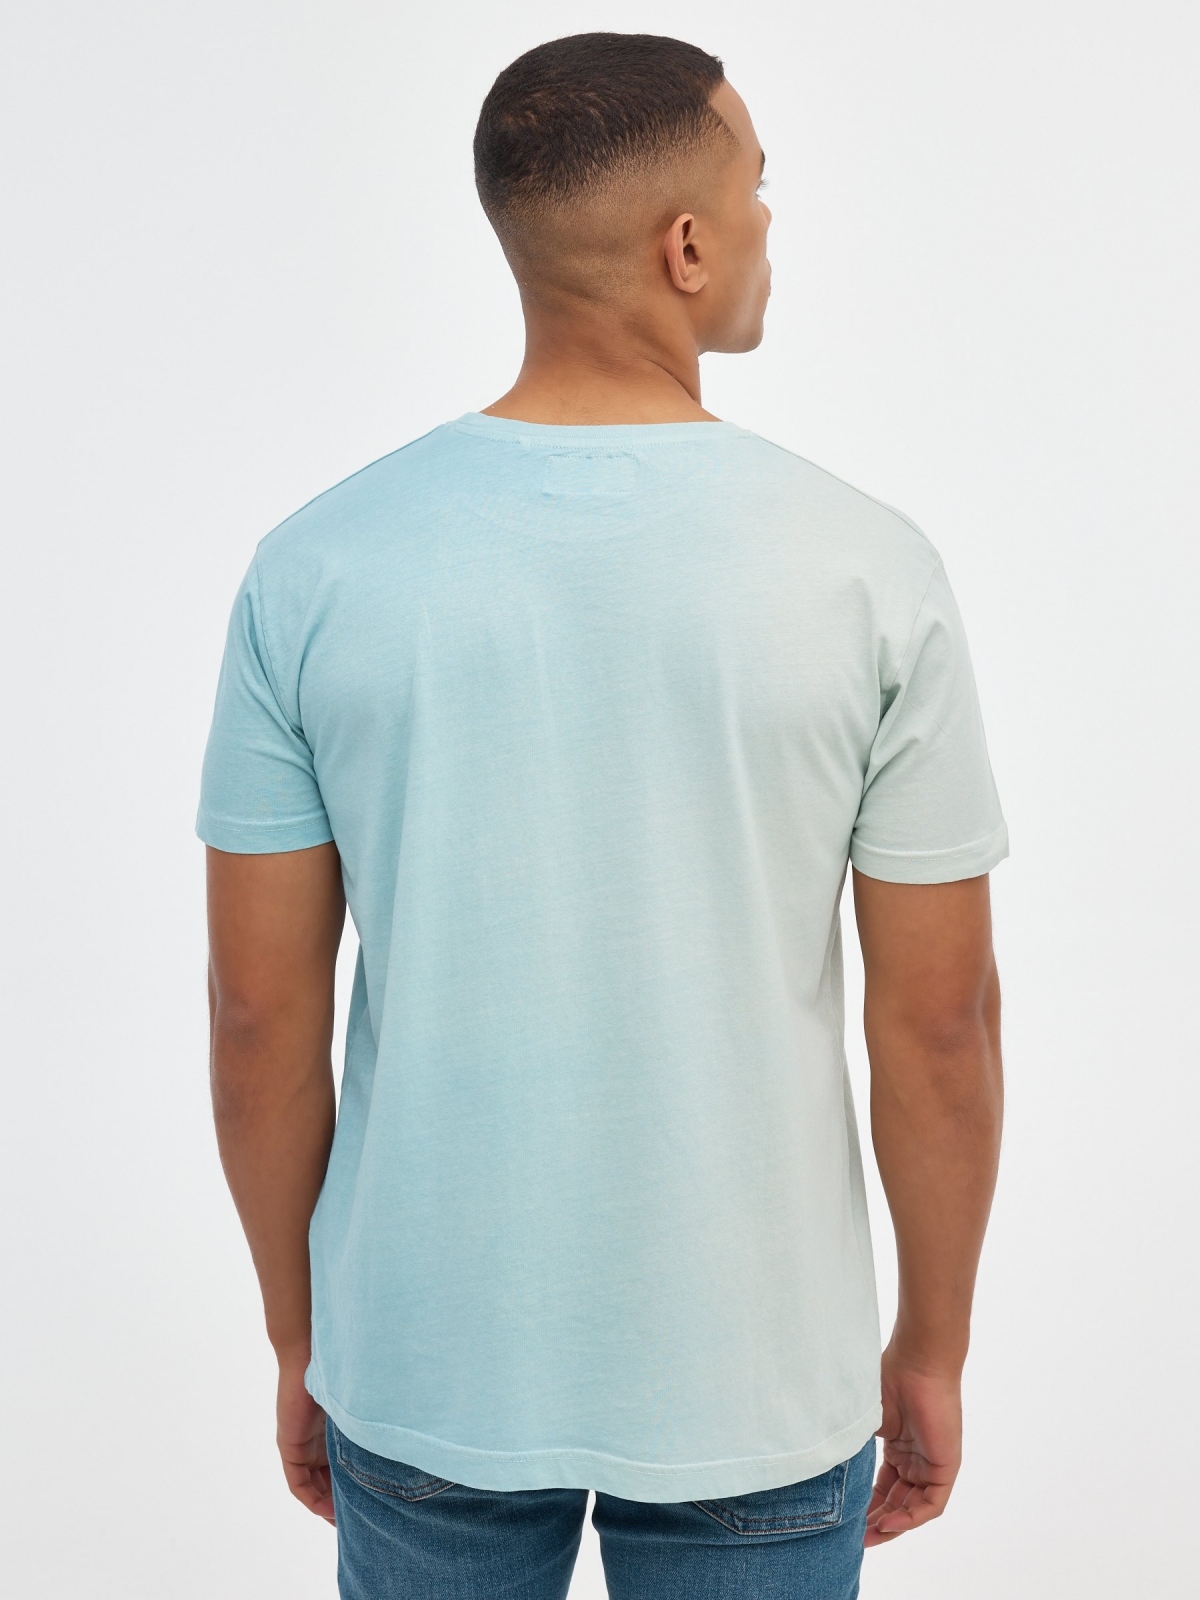 Gradient printed T-shirt sand middle back view